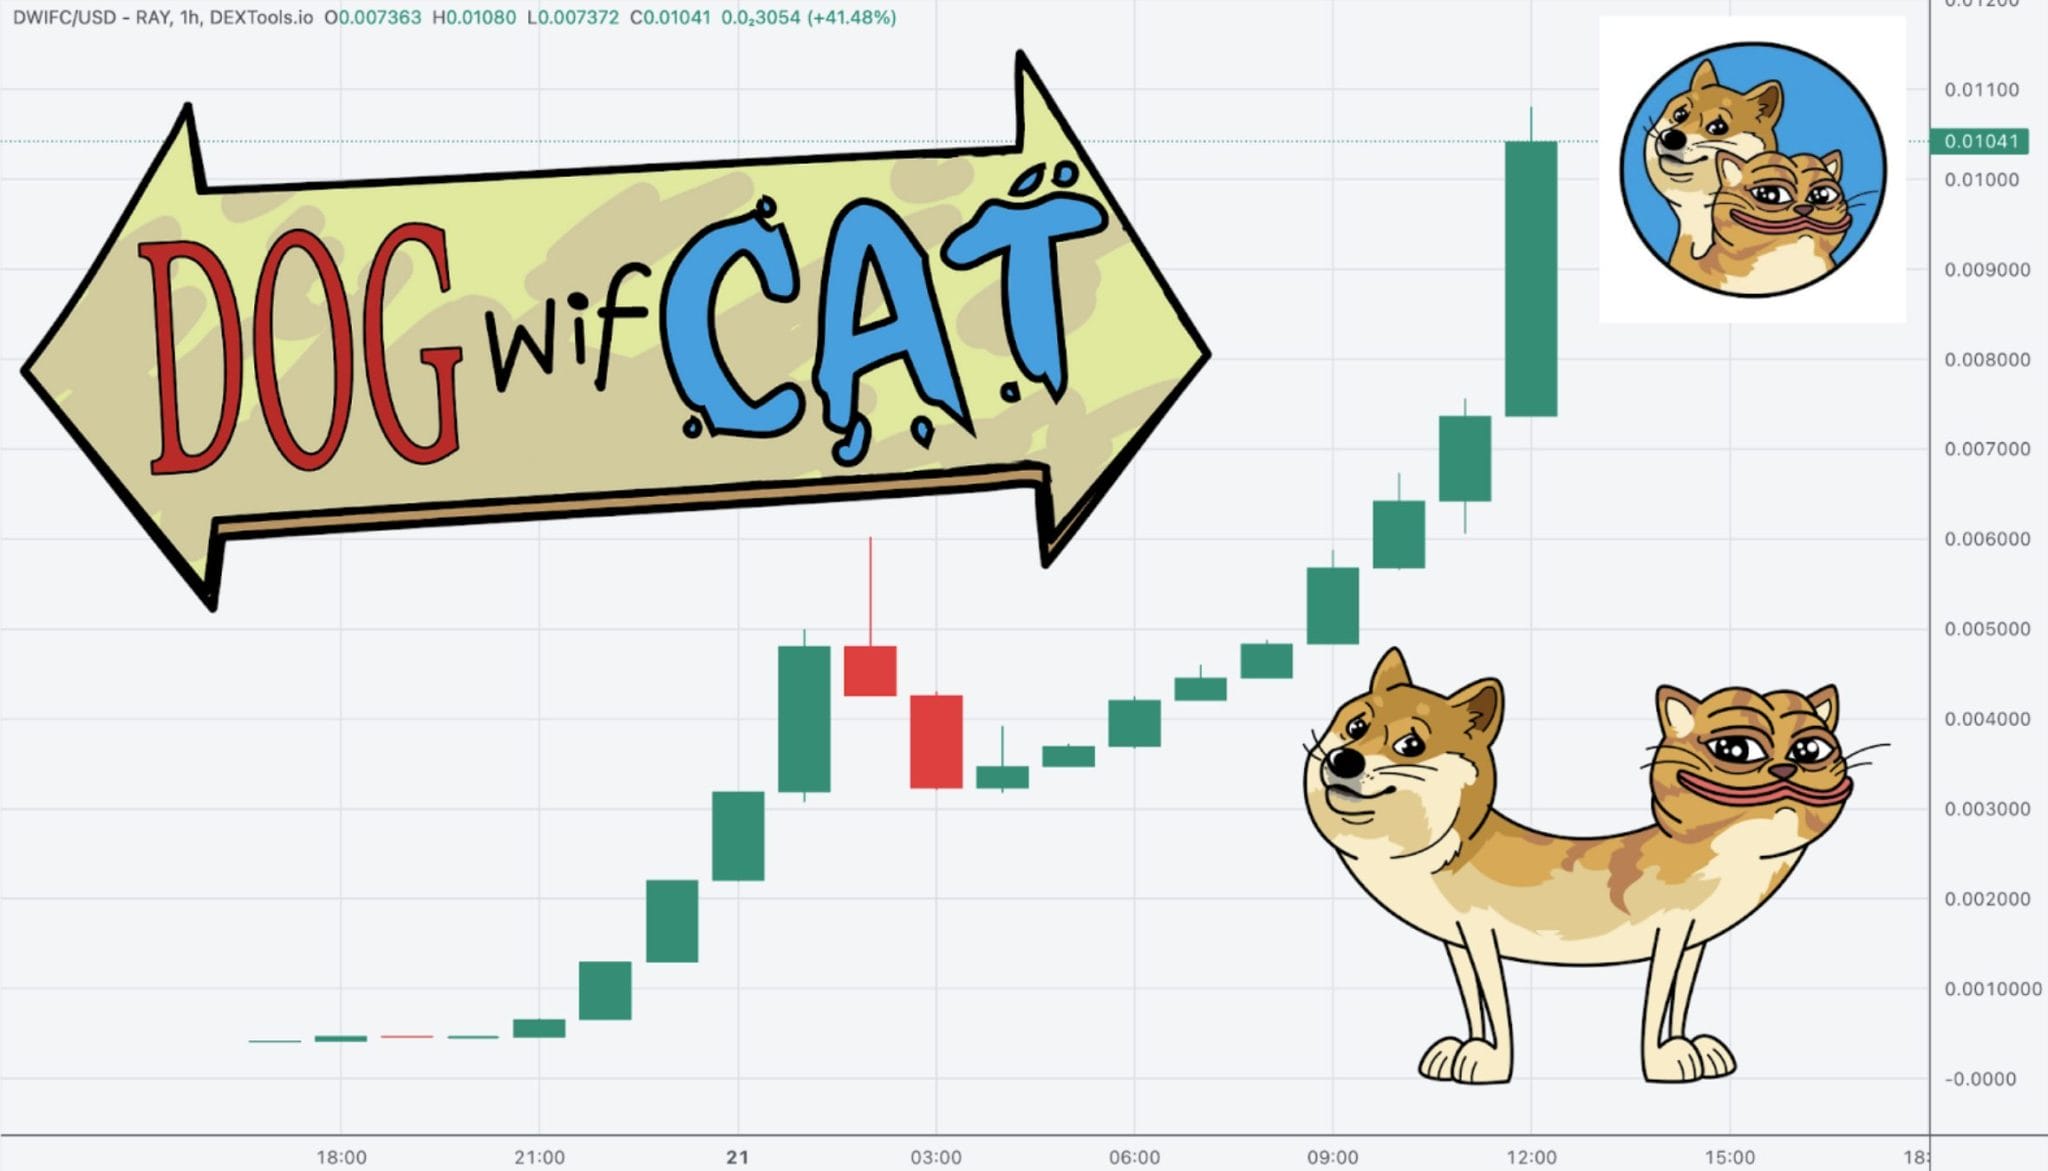 Fresh Solana Meme Coin DogWifCat Explodes 2,900% in 24 Hours, Subsequent $BOME?